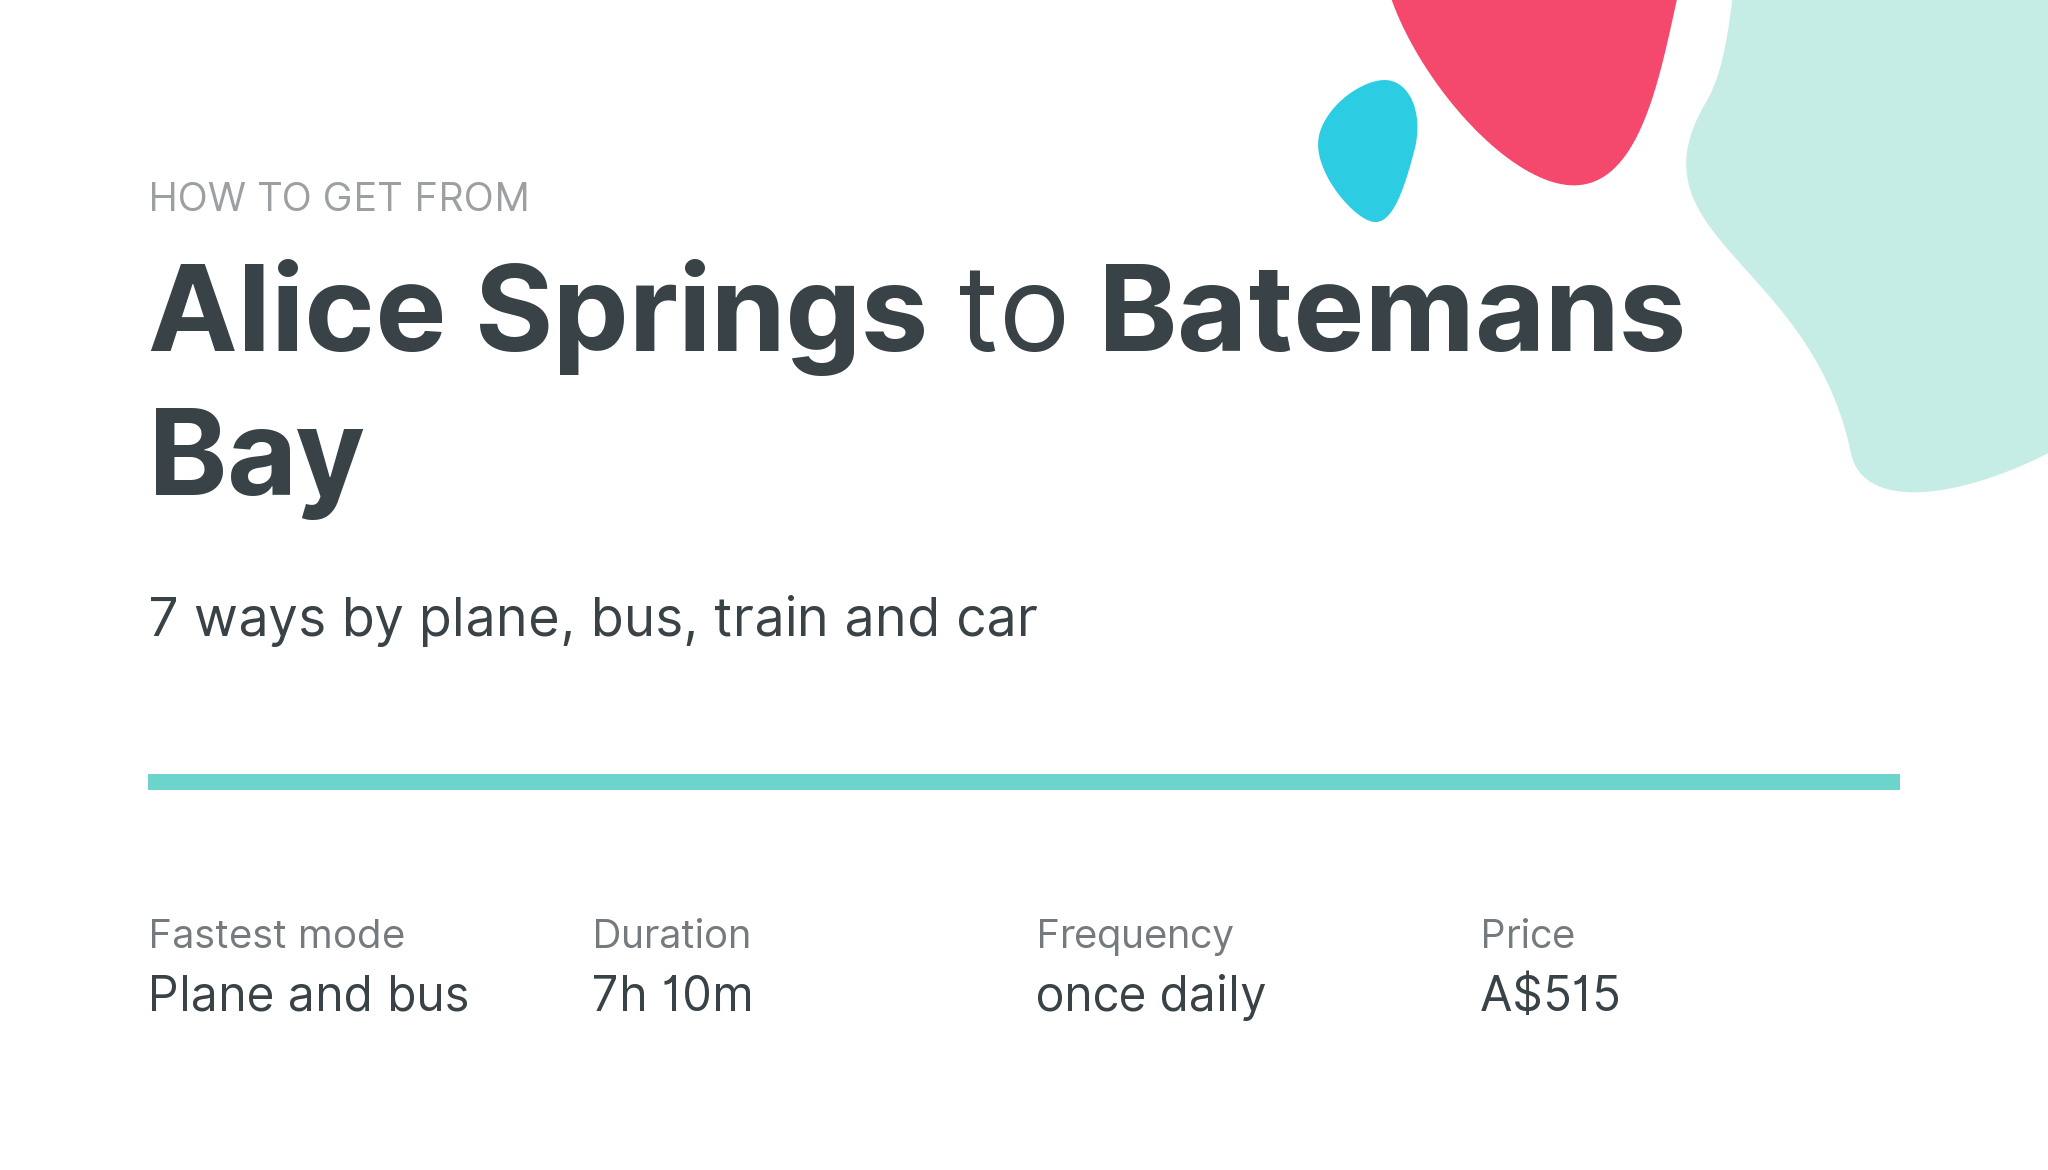 How do I get from Alice Springs to Batemans Bay